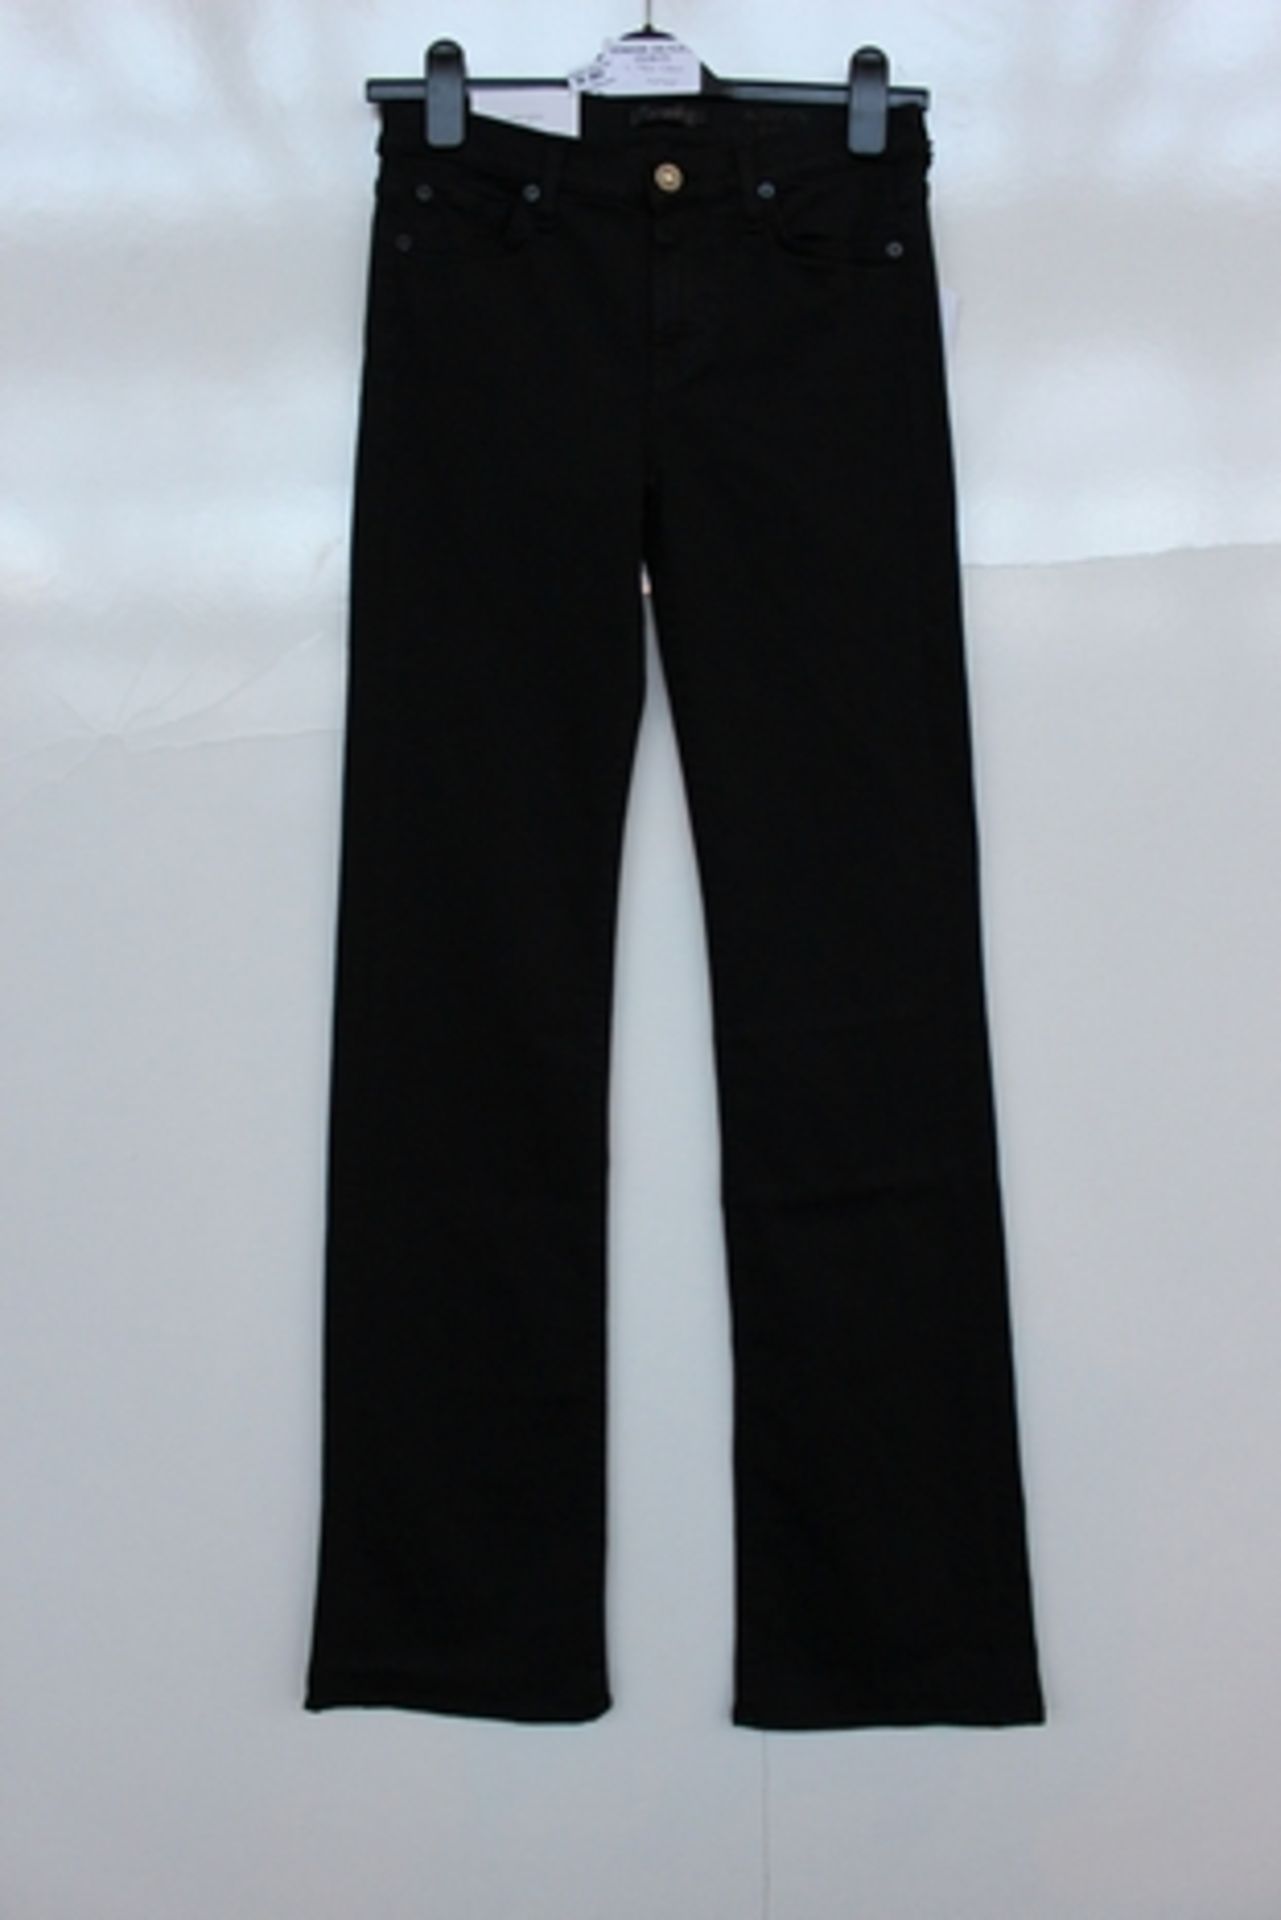 1X UNUSED PAIR OF FOR ALL MAN KIND LADIES TROUSERS SIZE 28 RRP £180 (DS-TLH-G) (90.061)